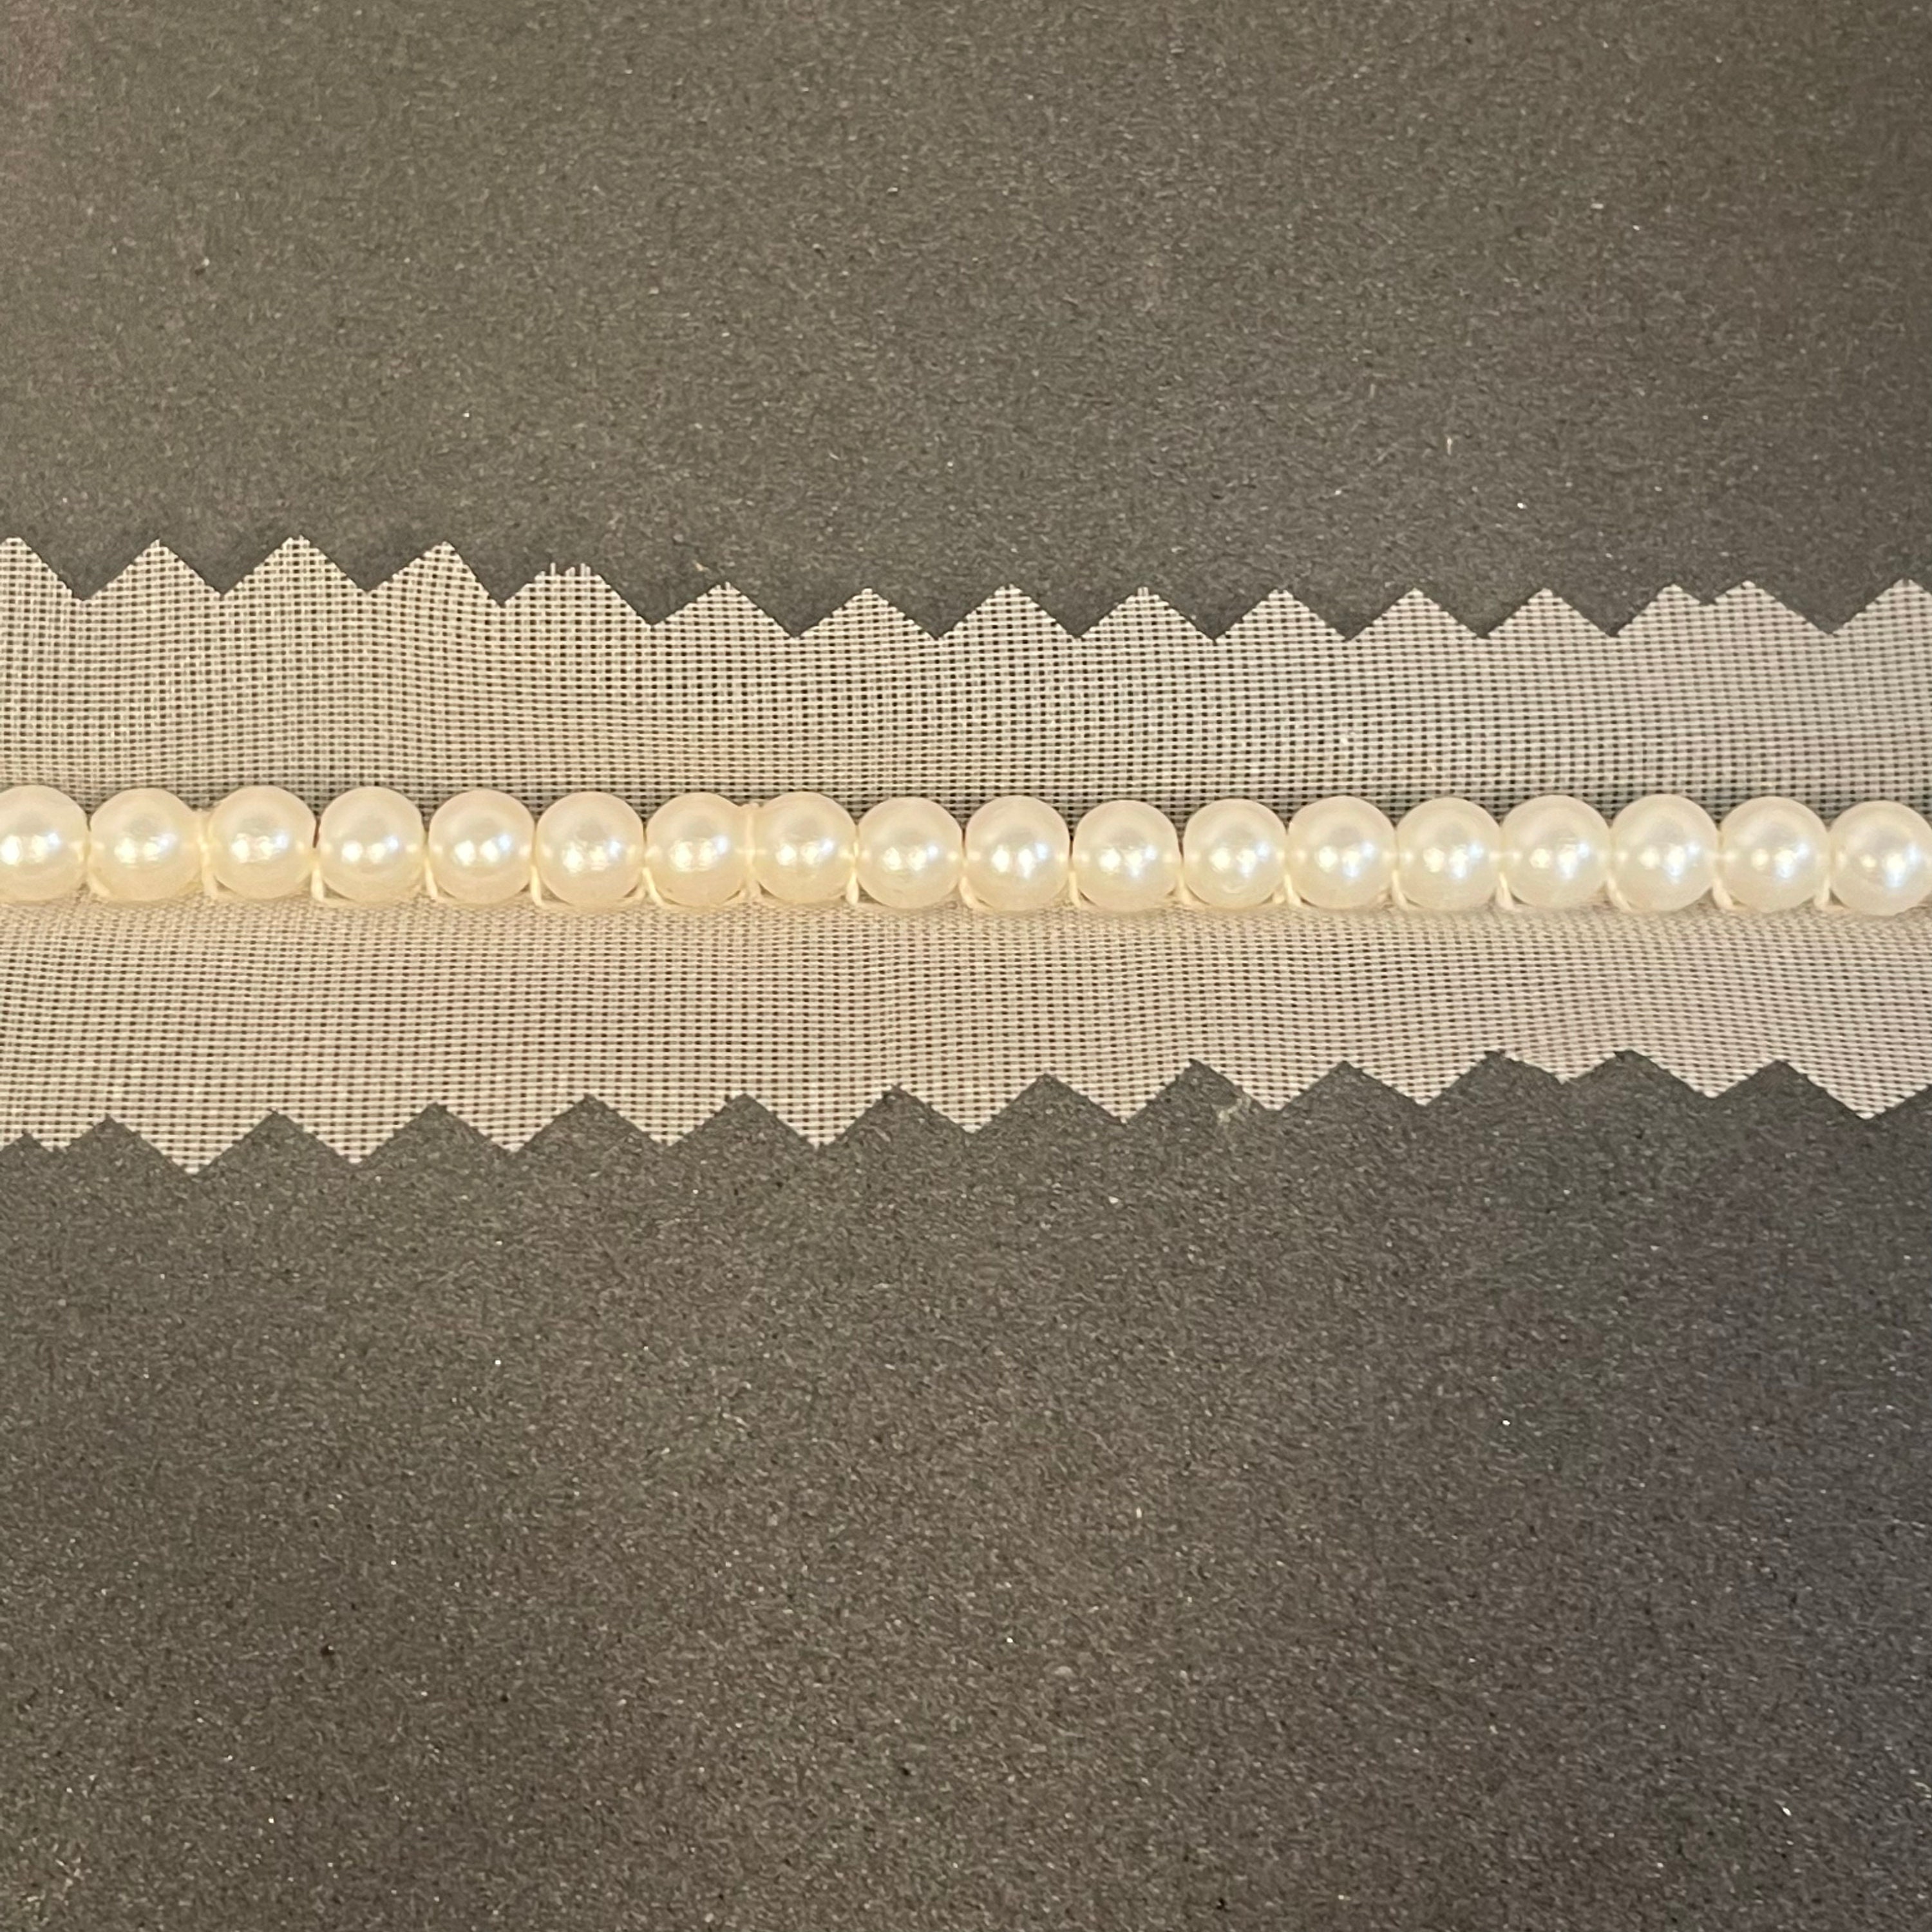 CREAM COLOR PEARL TRIM BY WRIGHTS 11 YARDS 5/8 WIDE